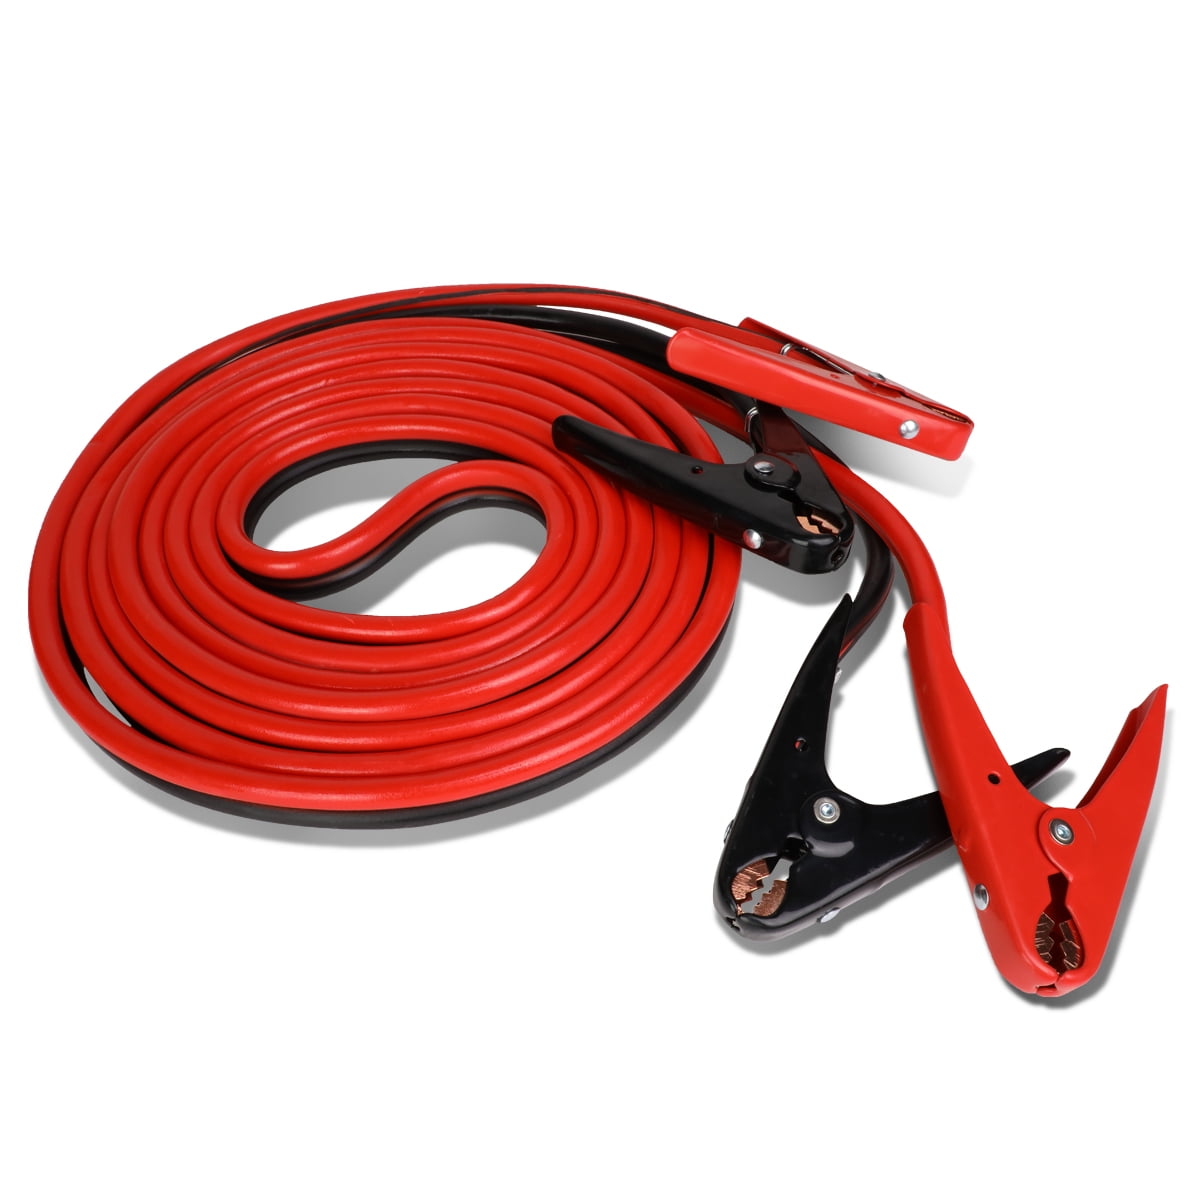 DNA Motoring BBC-T5 Heavy Duty 25Ft 4Gauge Booster Cable Power Jumper 500AMP 